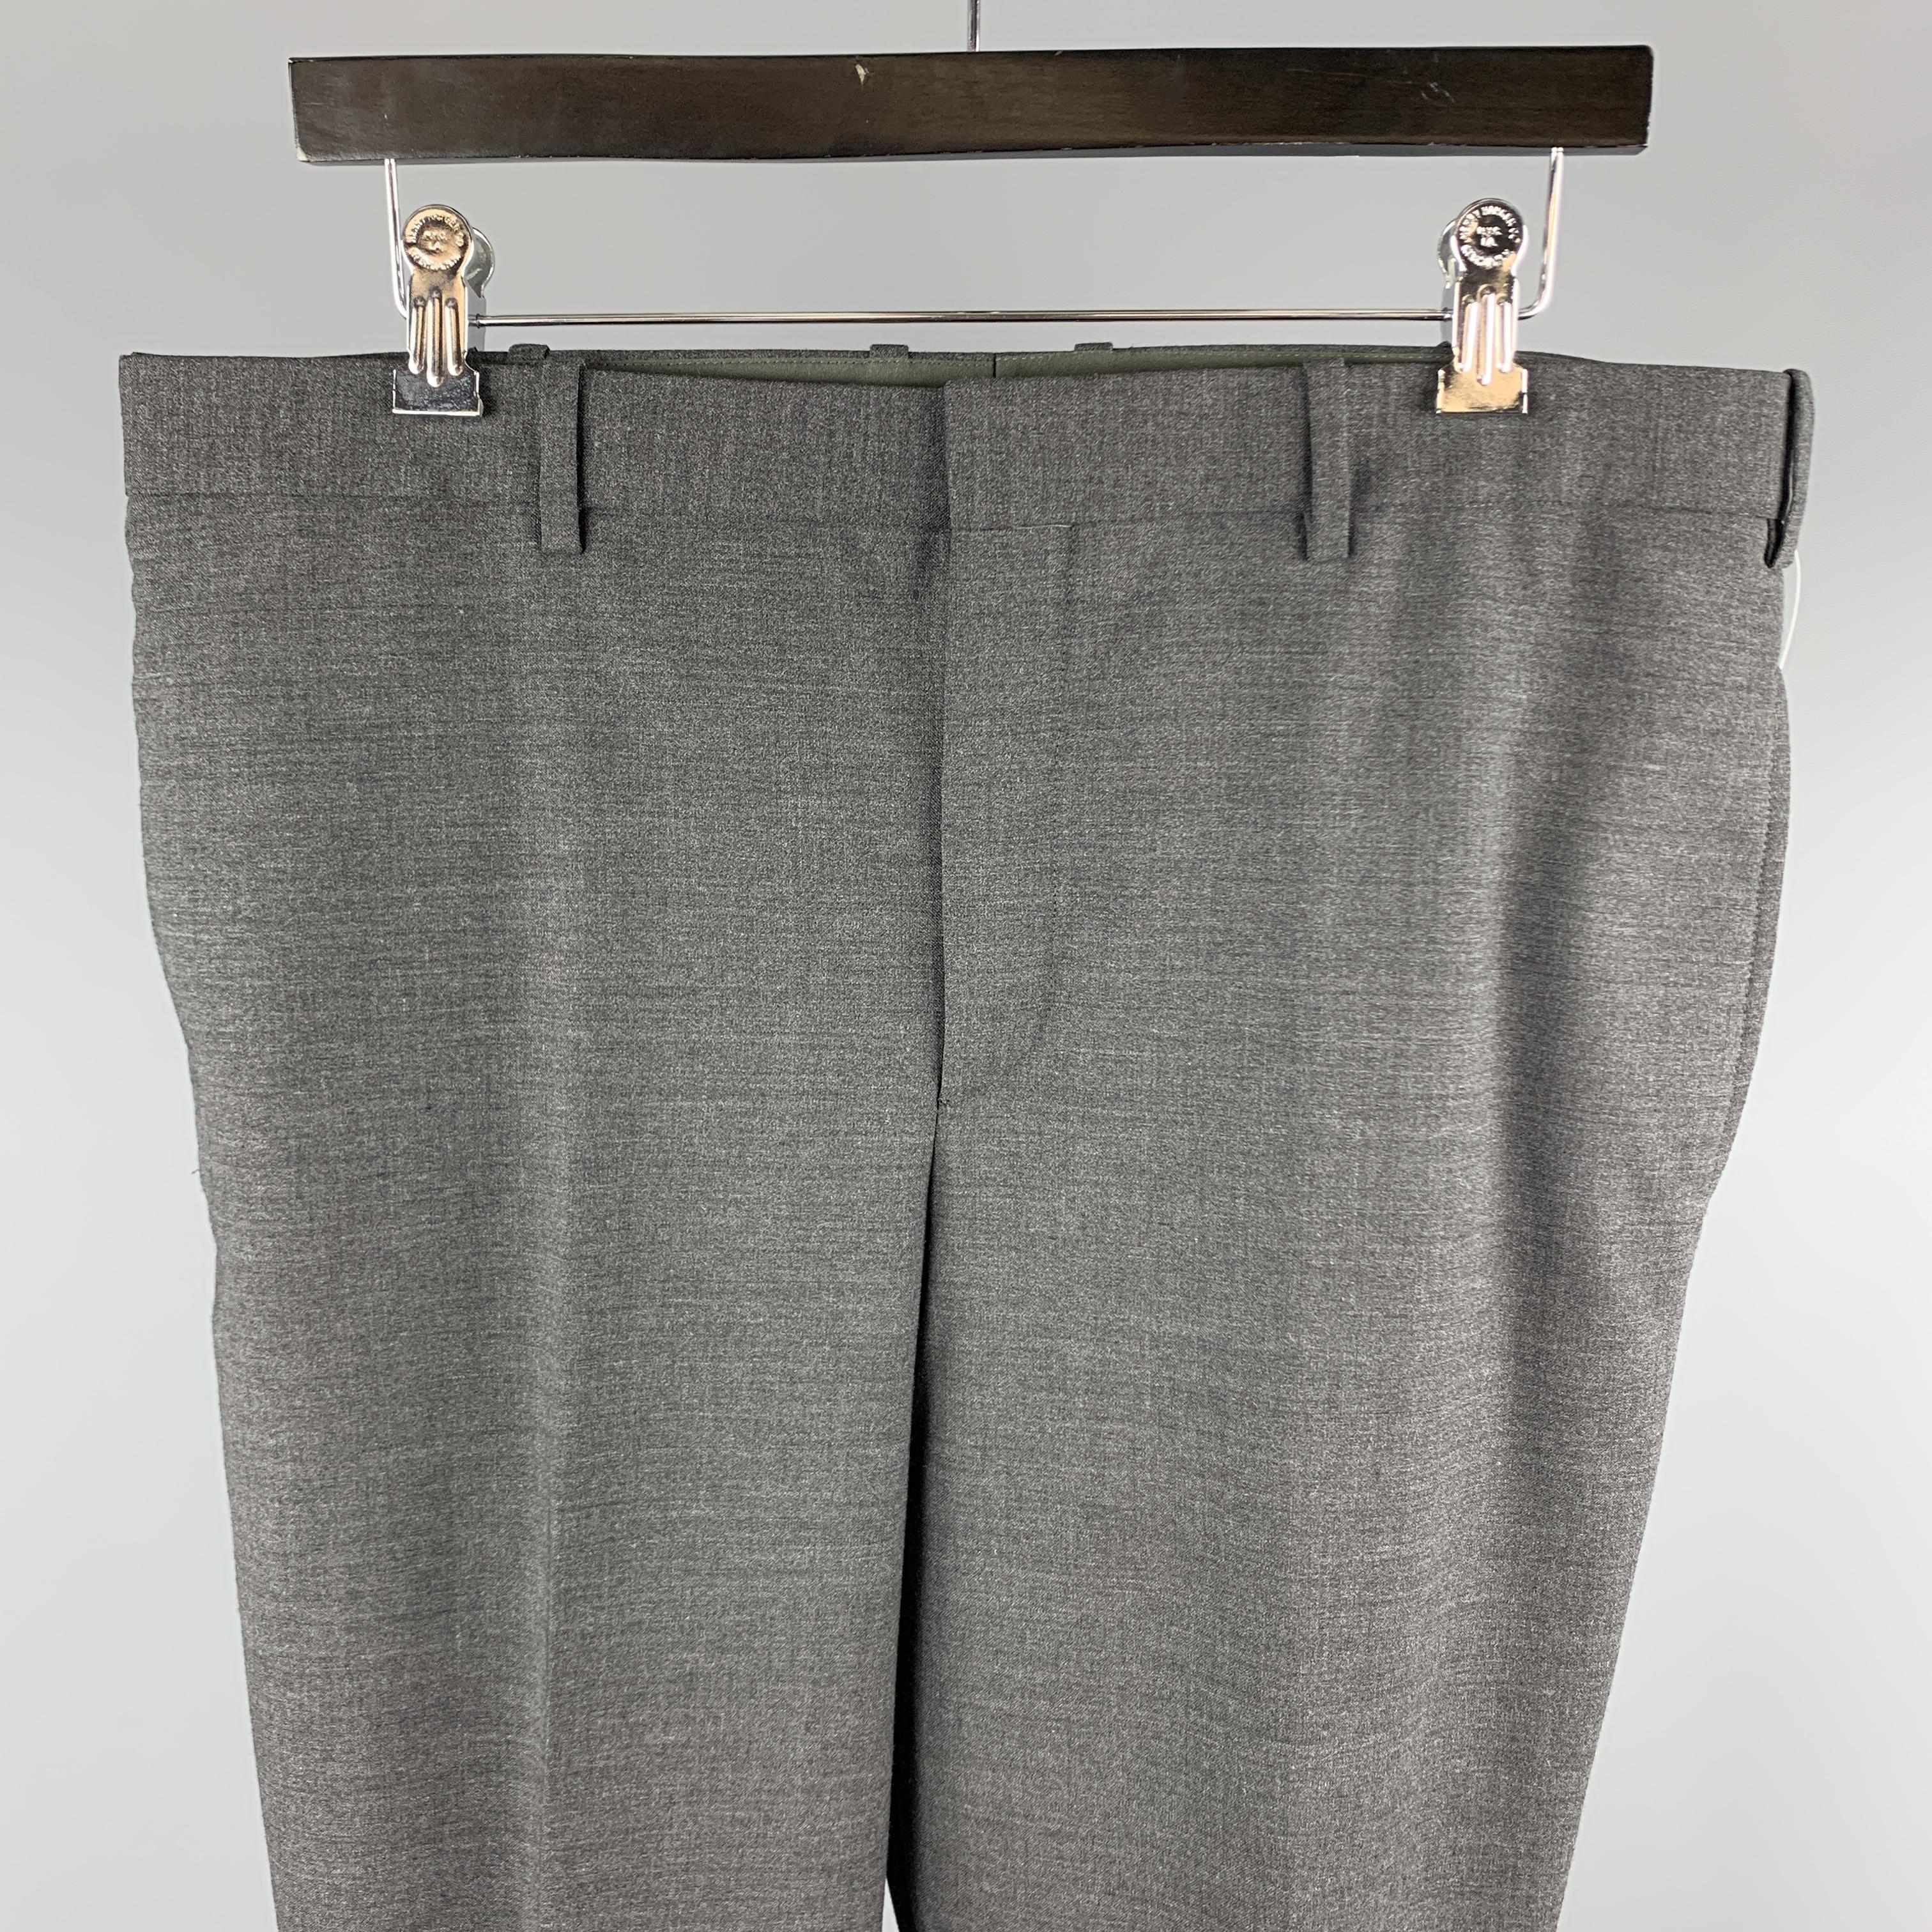 NEIL BARRETT tuxedo dress pants comes in a dark gray polyester blend featuring a skinny fit, regular rise, bottom leg zippers, and a zip fly closure. Made in Italy.

Excellent Pre-Owned Condition.
Marked: IT 52

Measurements:

Waist: 36 in. 
Rise: